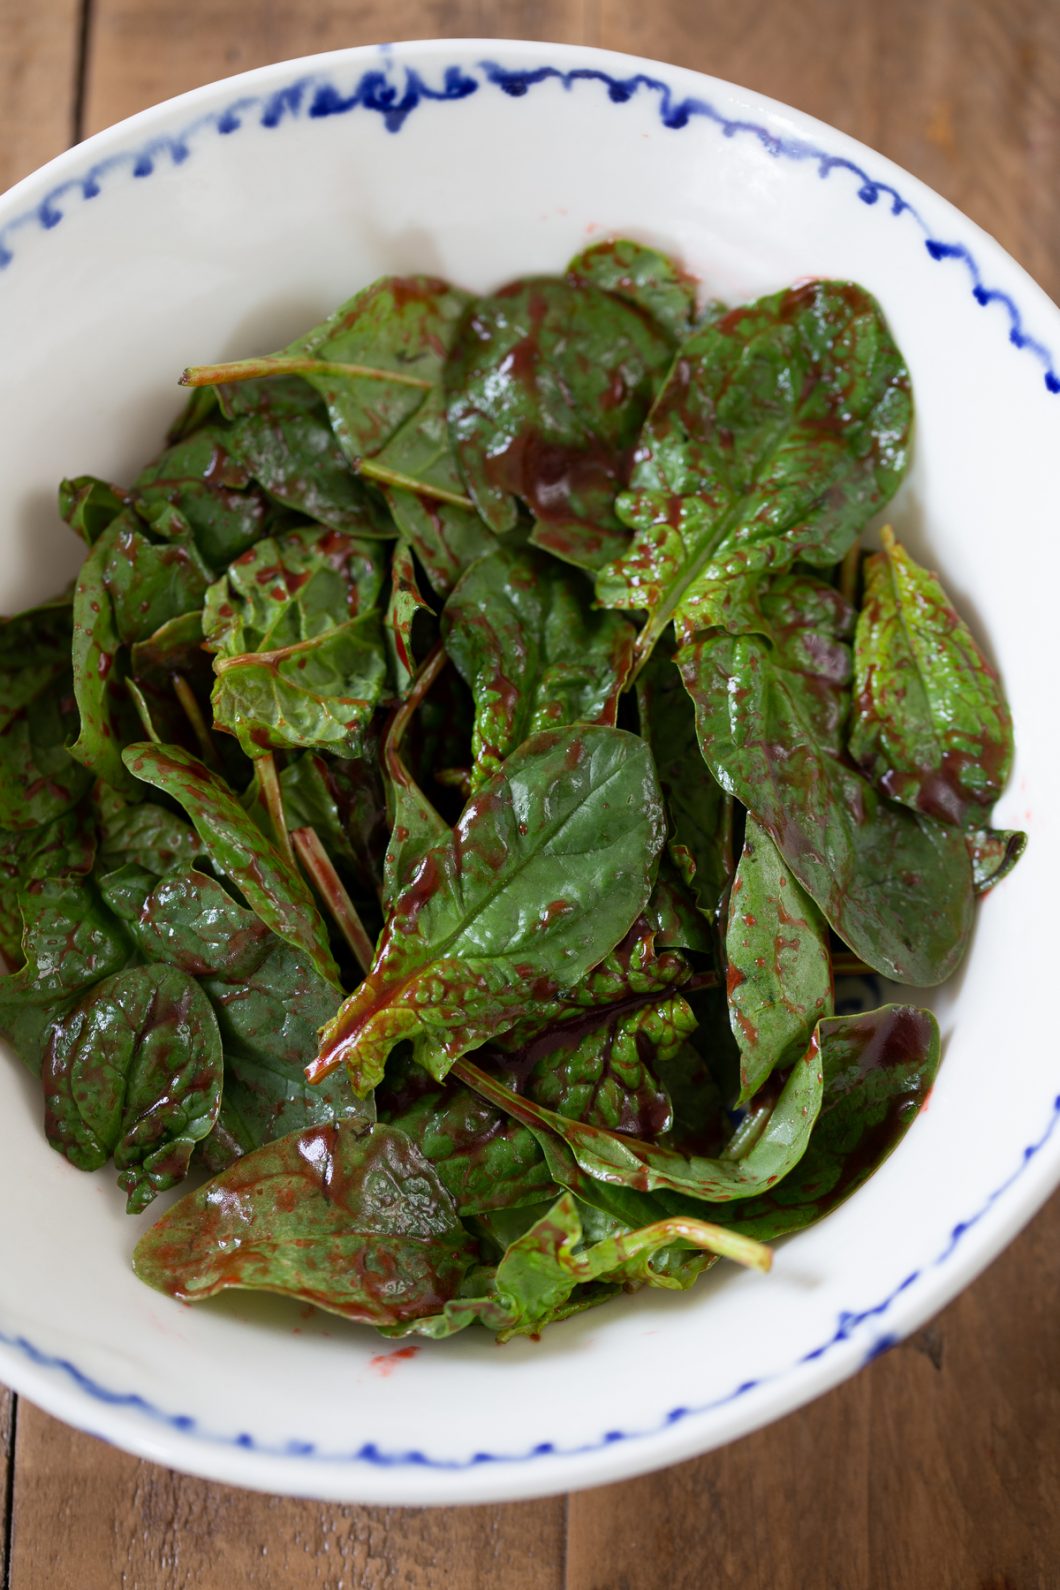 Tossing spinach leaves in dressing.